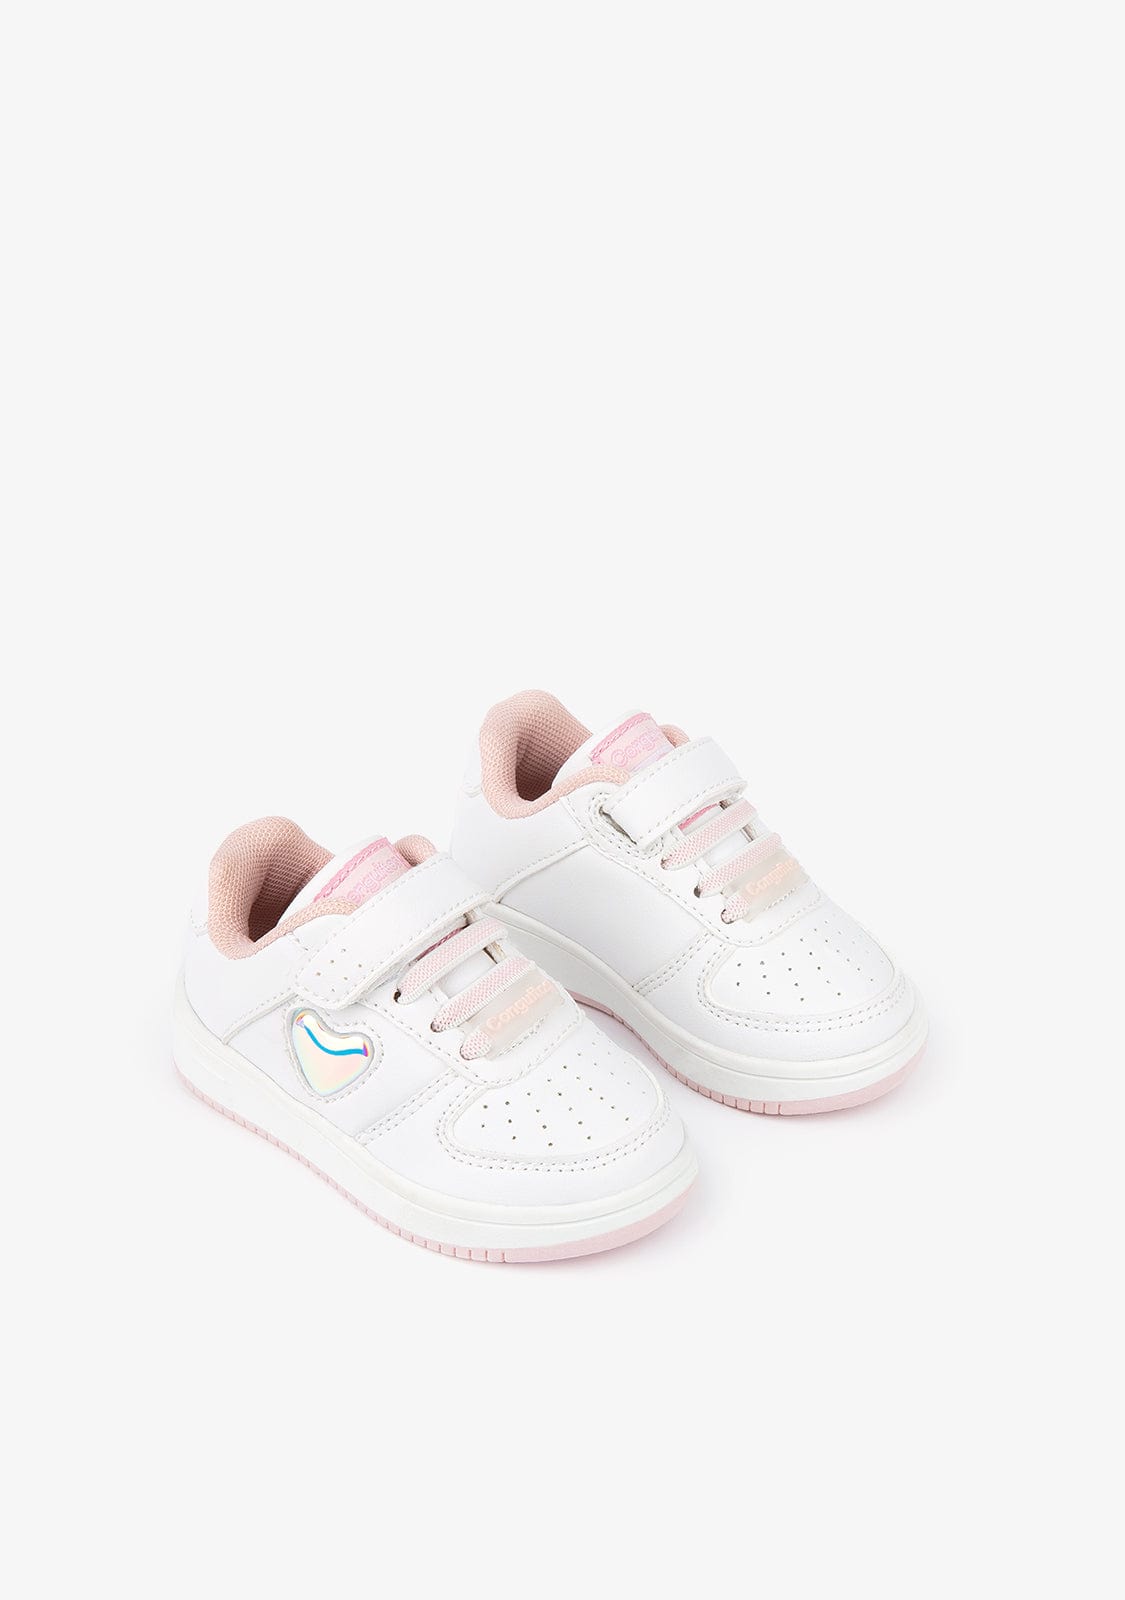 OSITO Shoes Baby's White Heart With Lights Sneakers